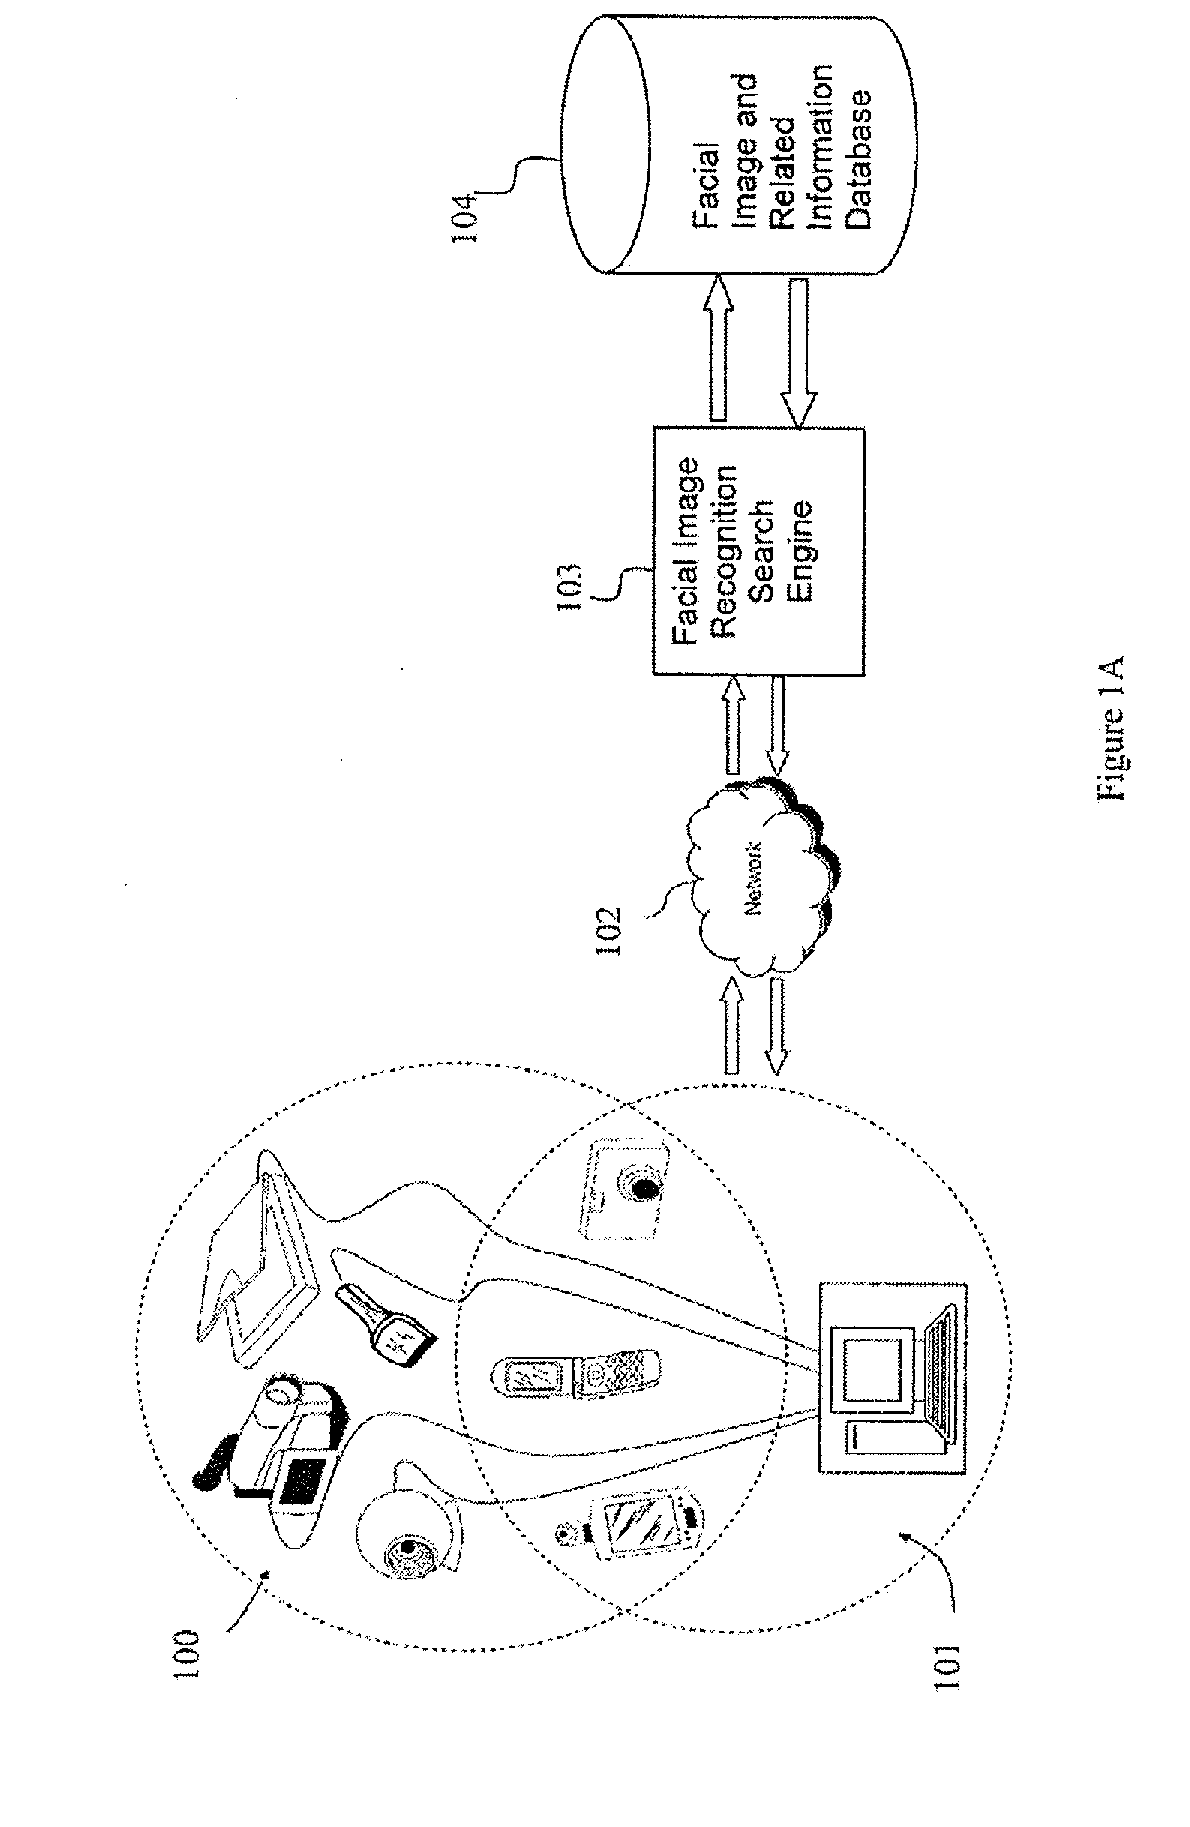 Photo Automatic Linking System and method for accessing, linking, and visualizing "key-face" and/or multiple similar facial images along with associated electronic data via a facial image recognition search engine